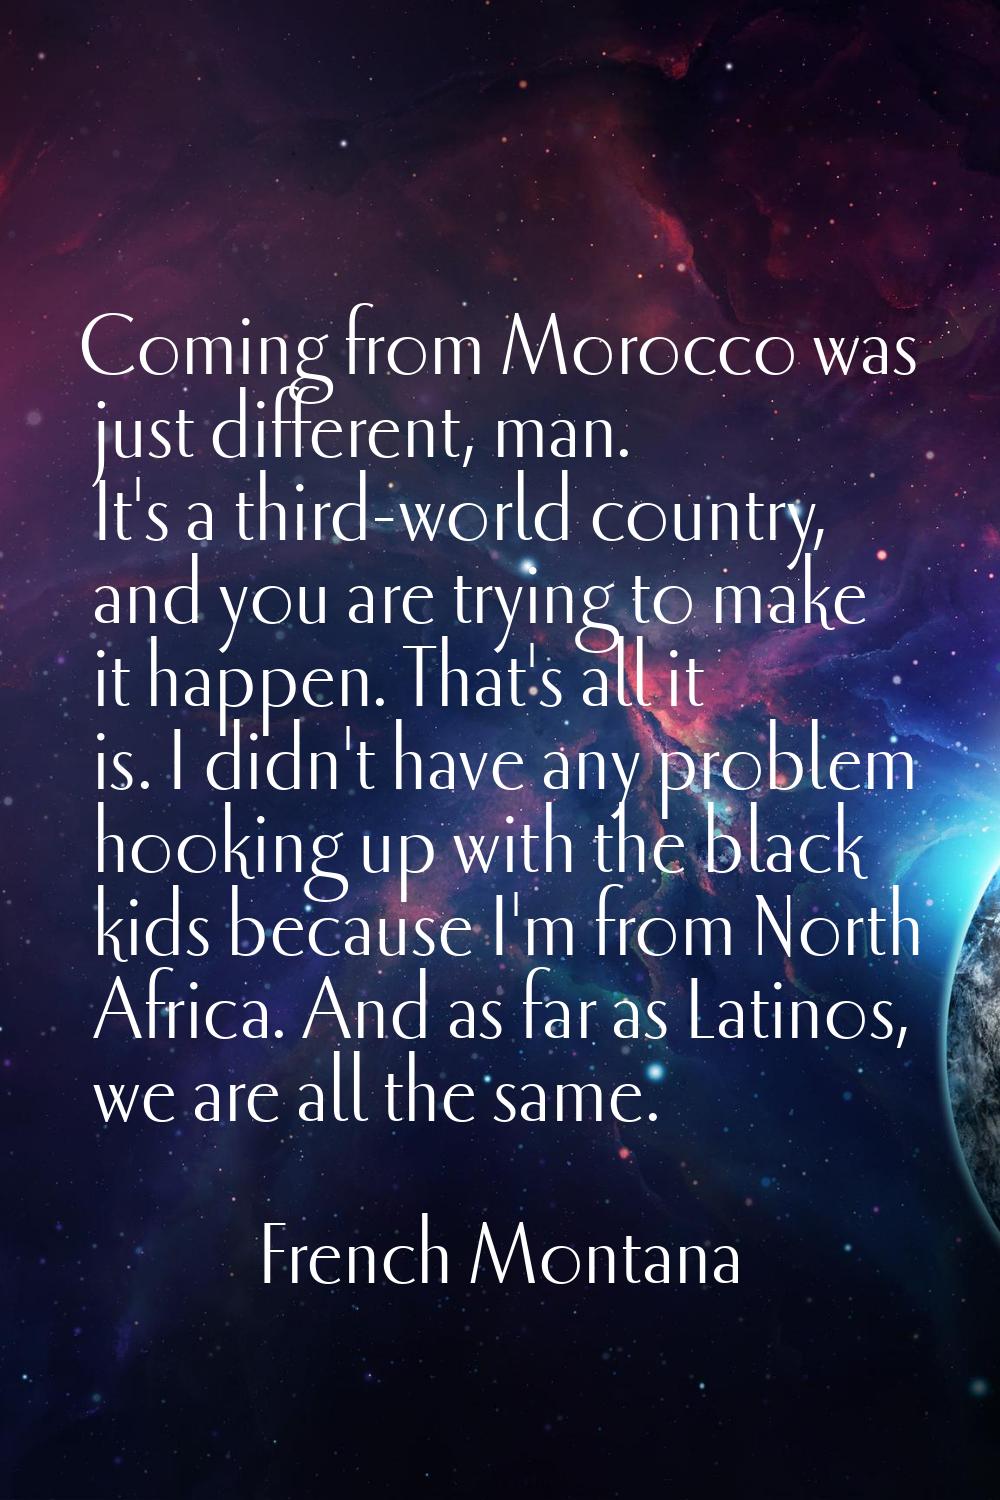 Coming from Morocco was just different, man. It's a third-world country, and you are trying to make